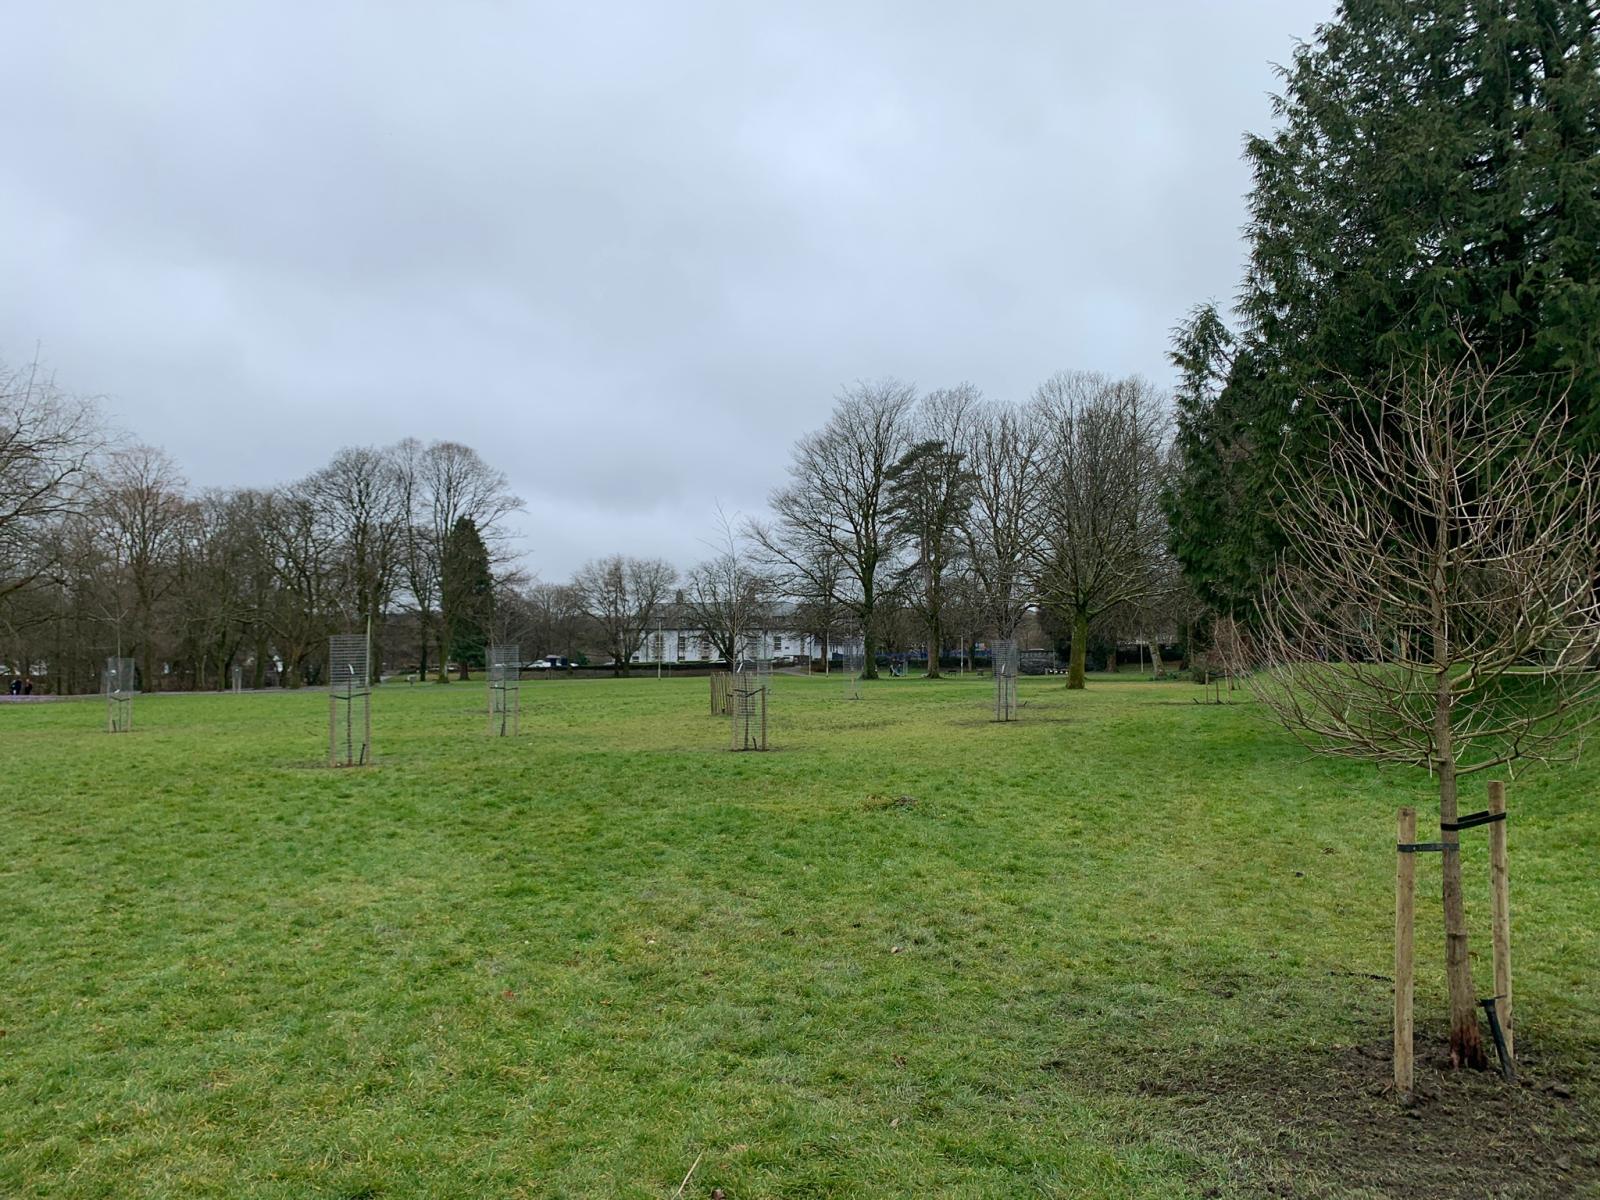 Tree Planting Project in the Meadows